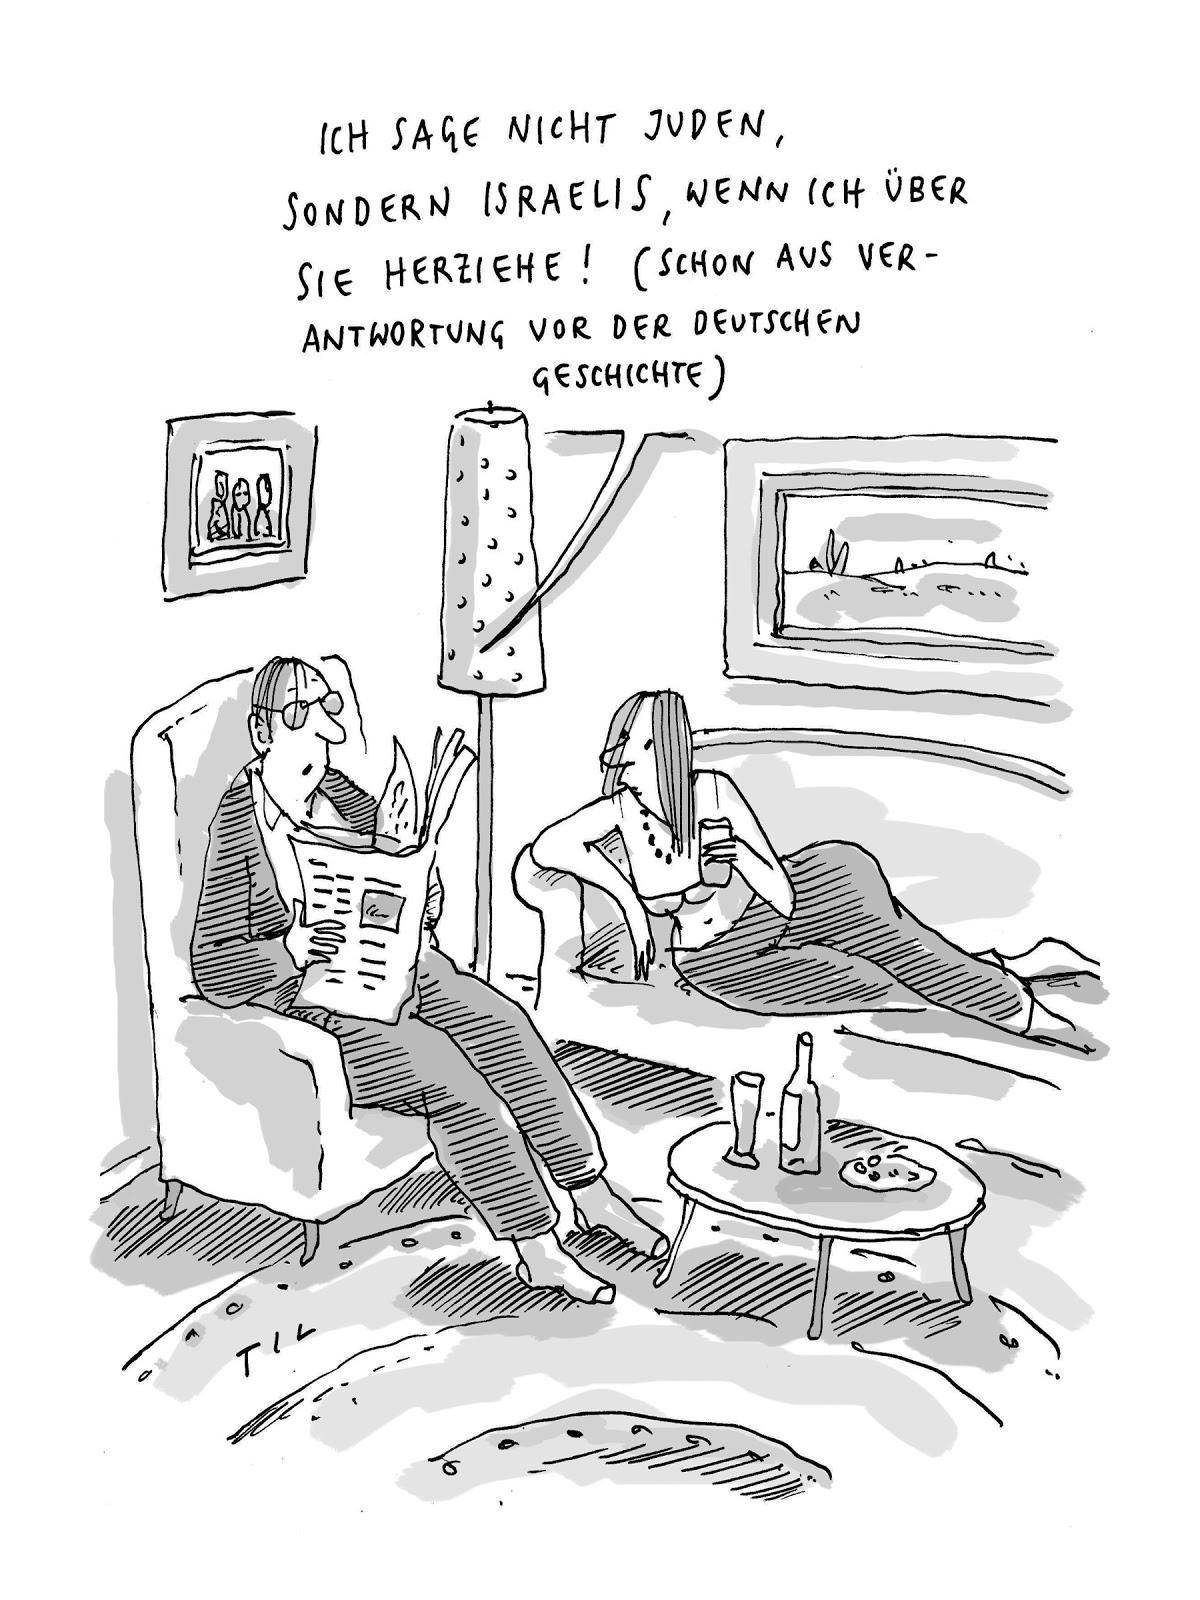 A black and white cartoon of two people talking in a living room.